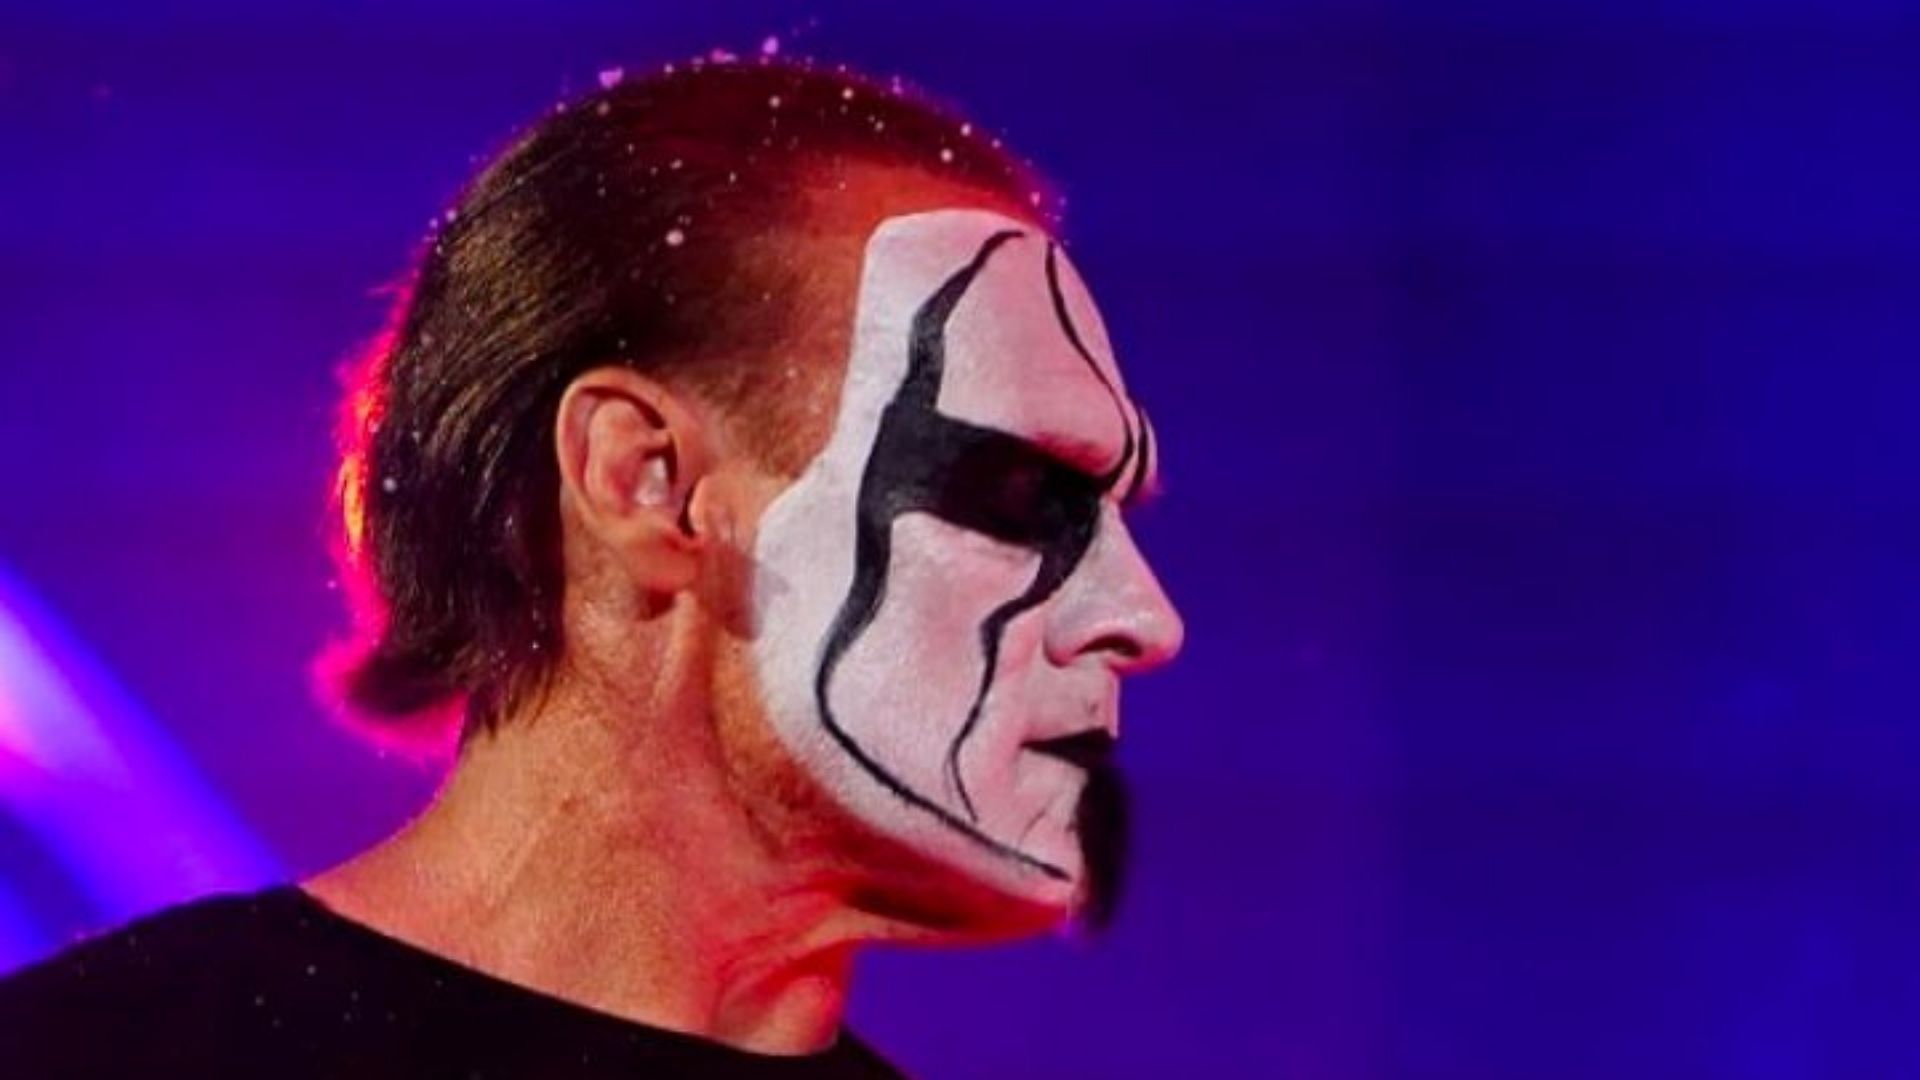 Sting has had his iconic face paint since 1996